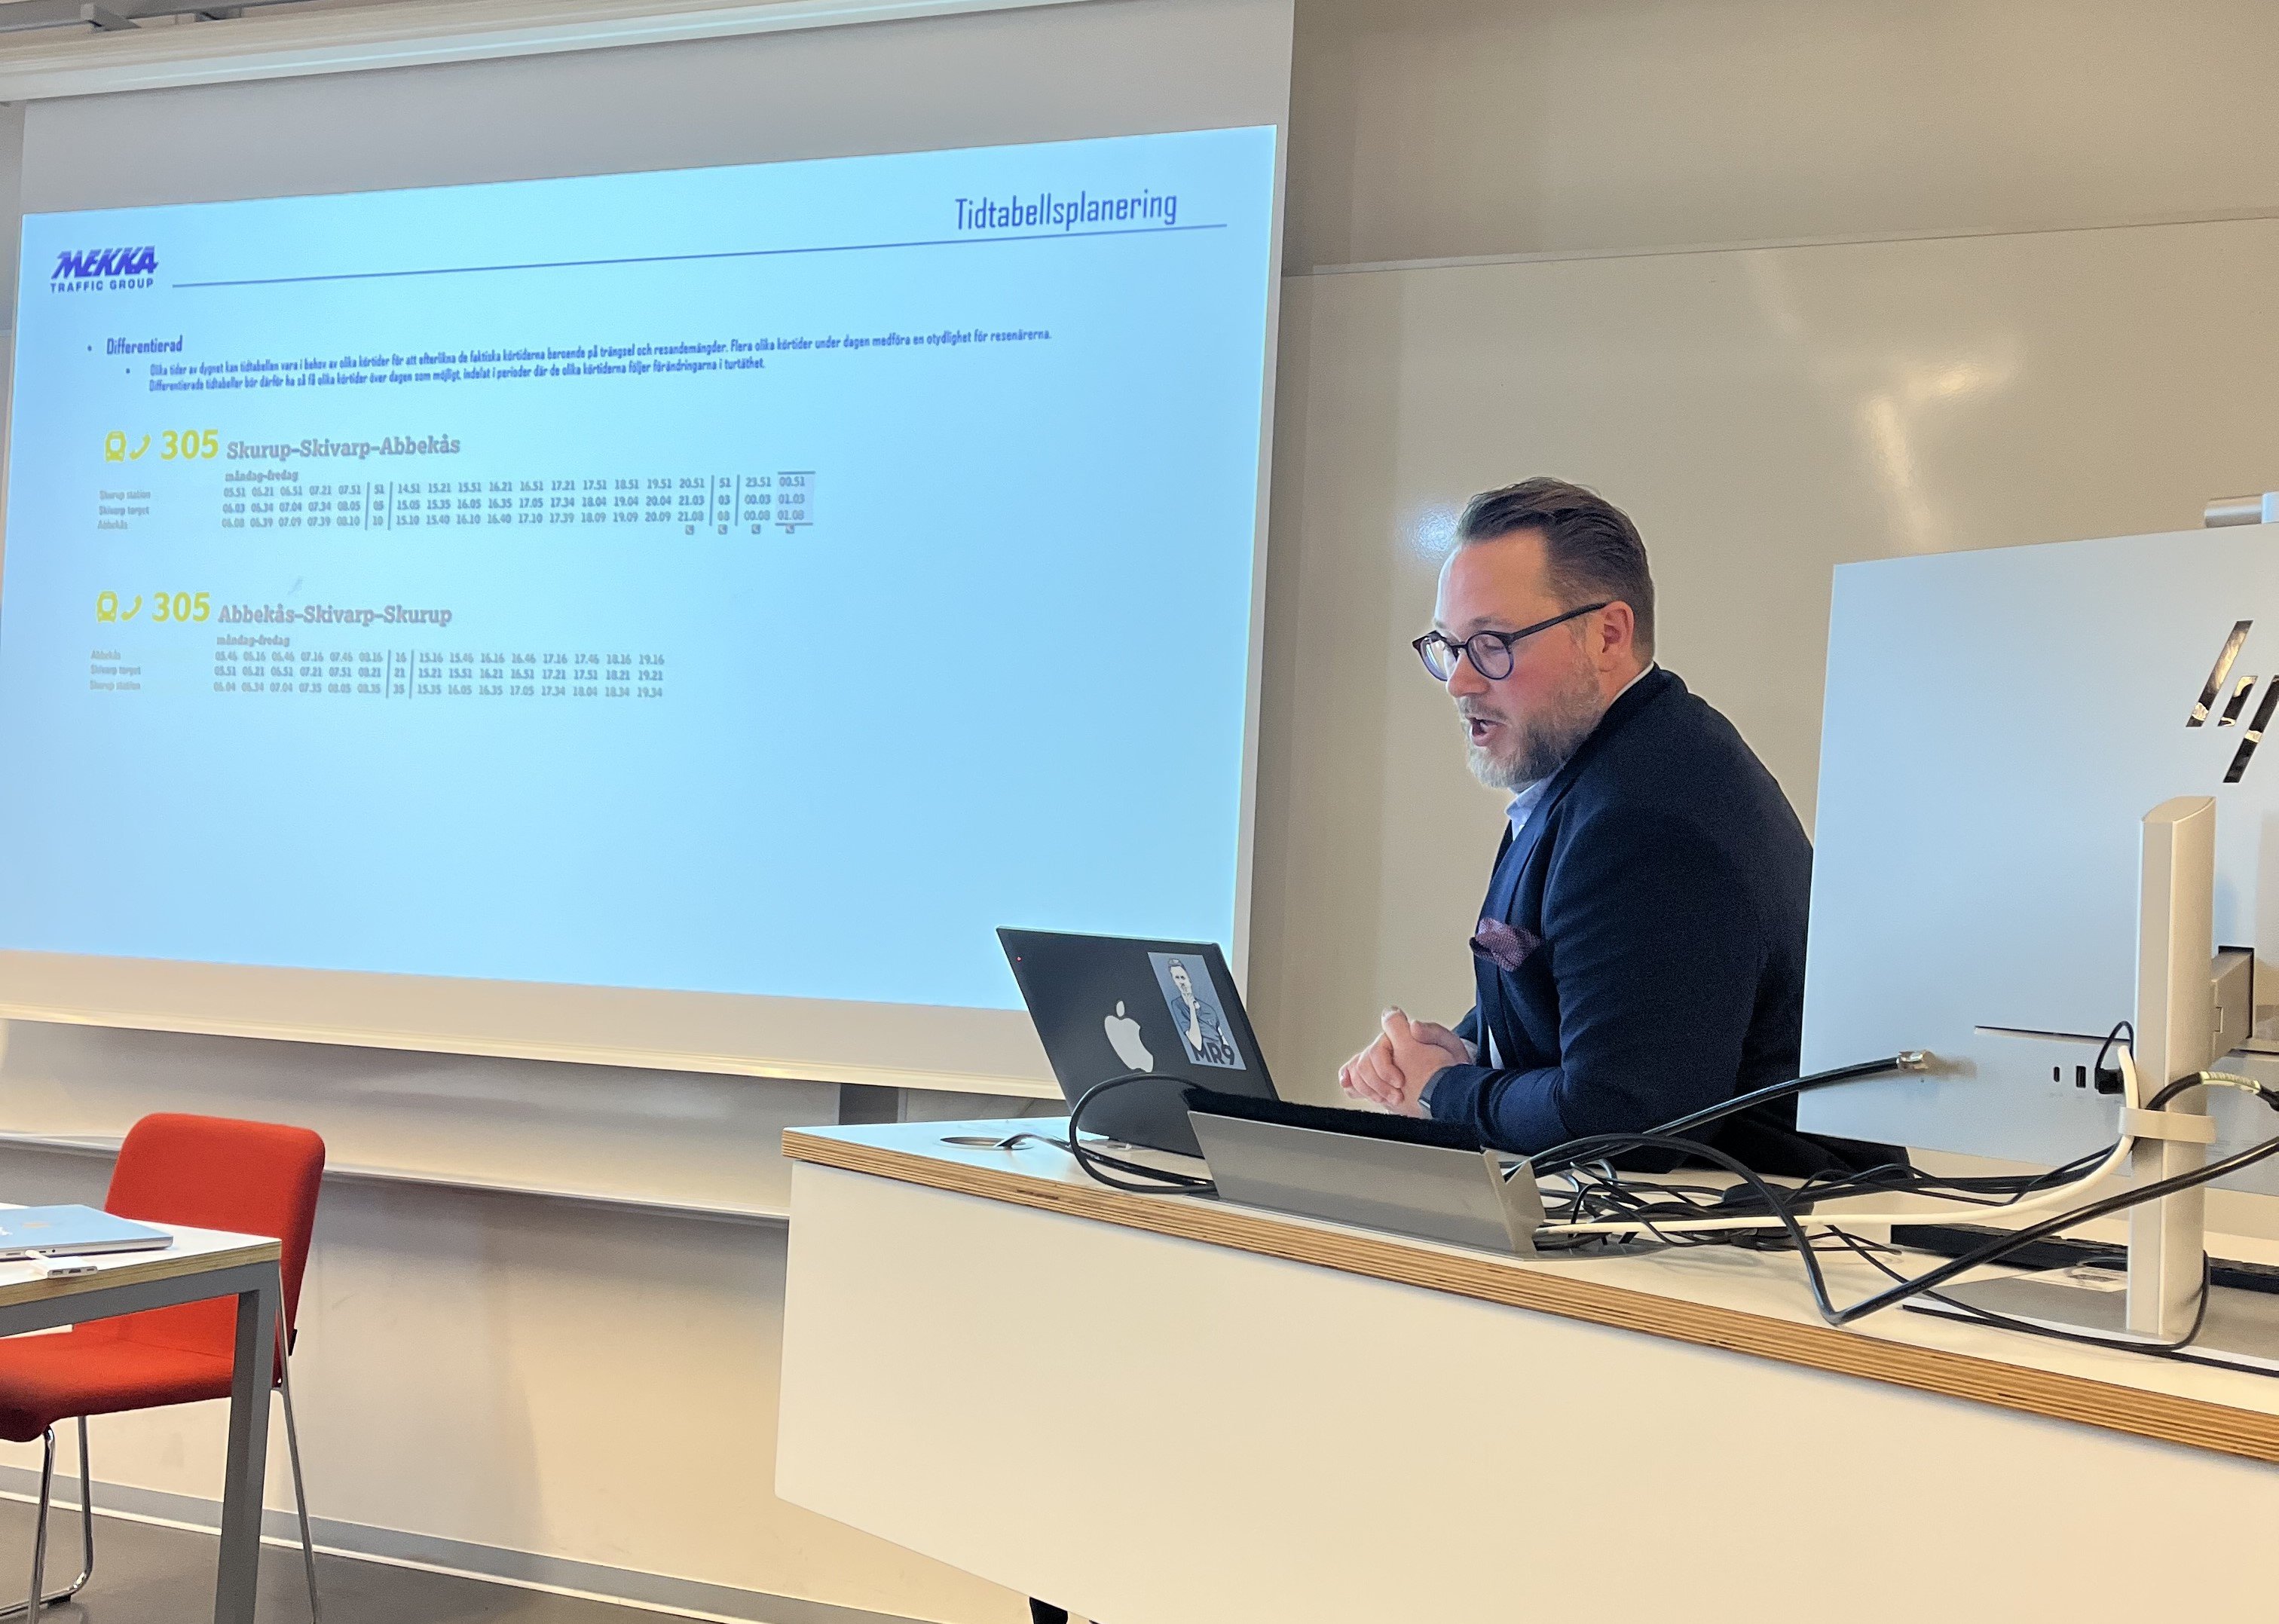 As part of the Optibus Academy, Johan Järpell, Chief Traffic Planner at Bergkvarabuss, presents insights into how planning practices are applied in real-world settings